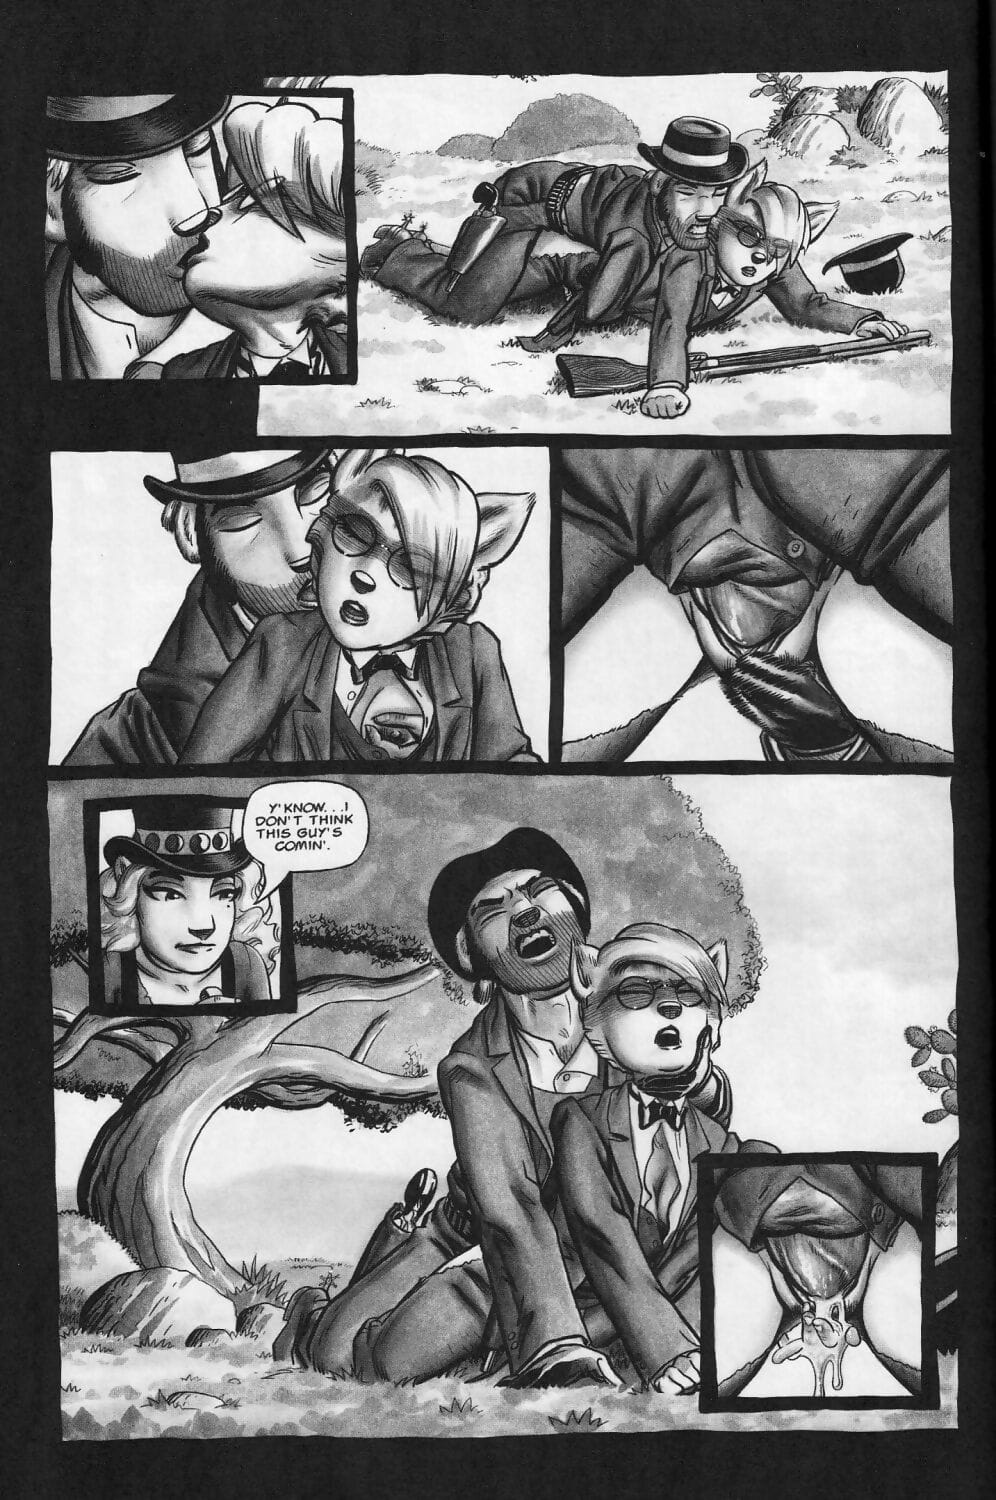 Short Strokes #2 page 1